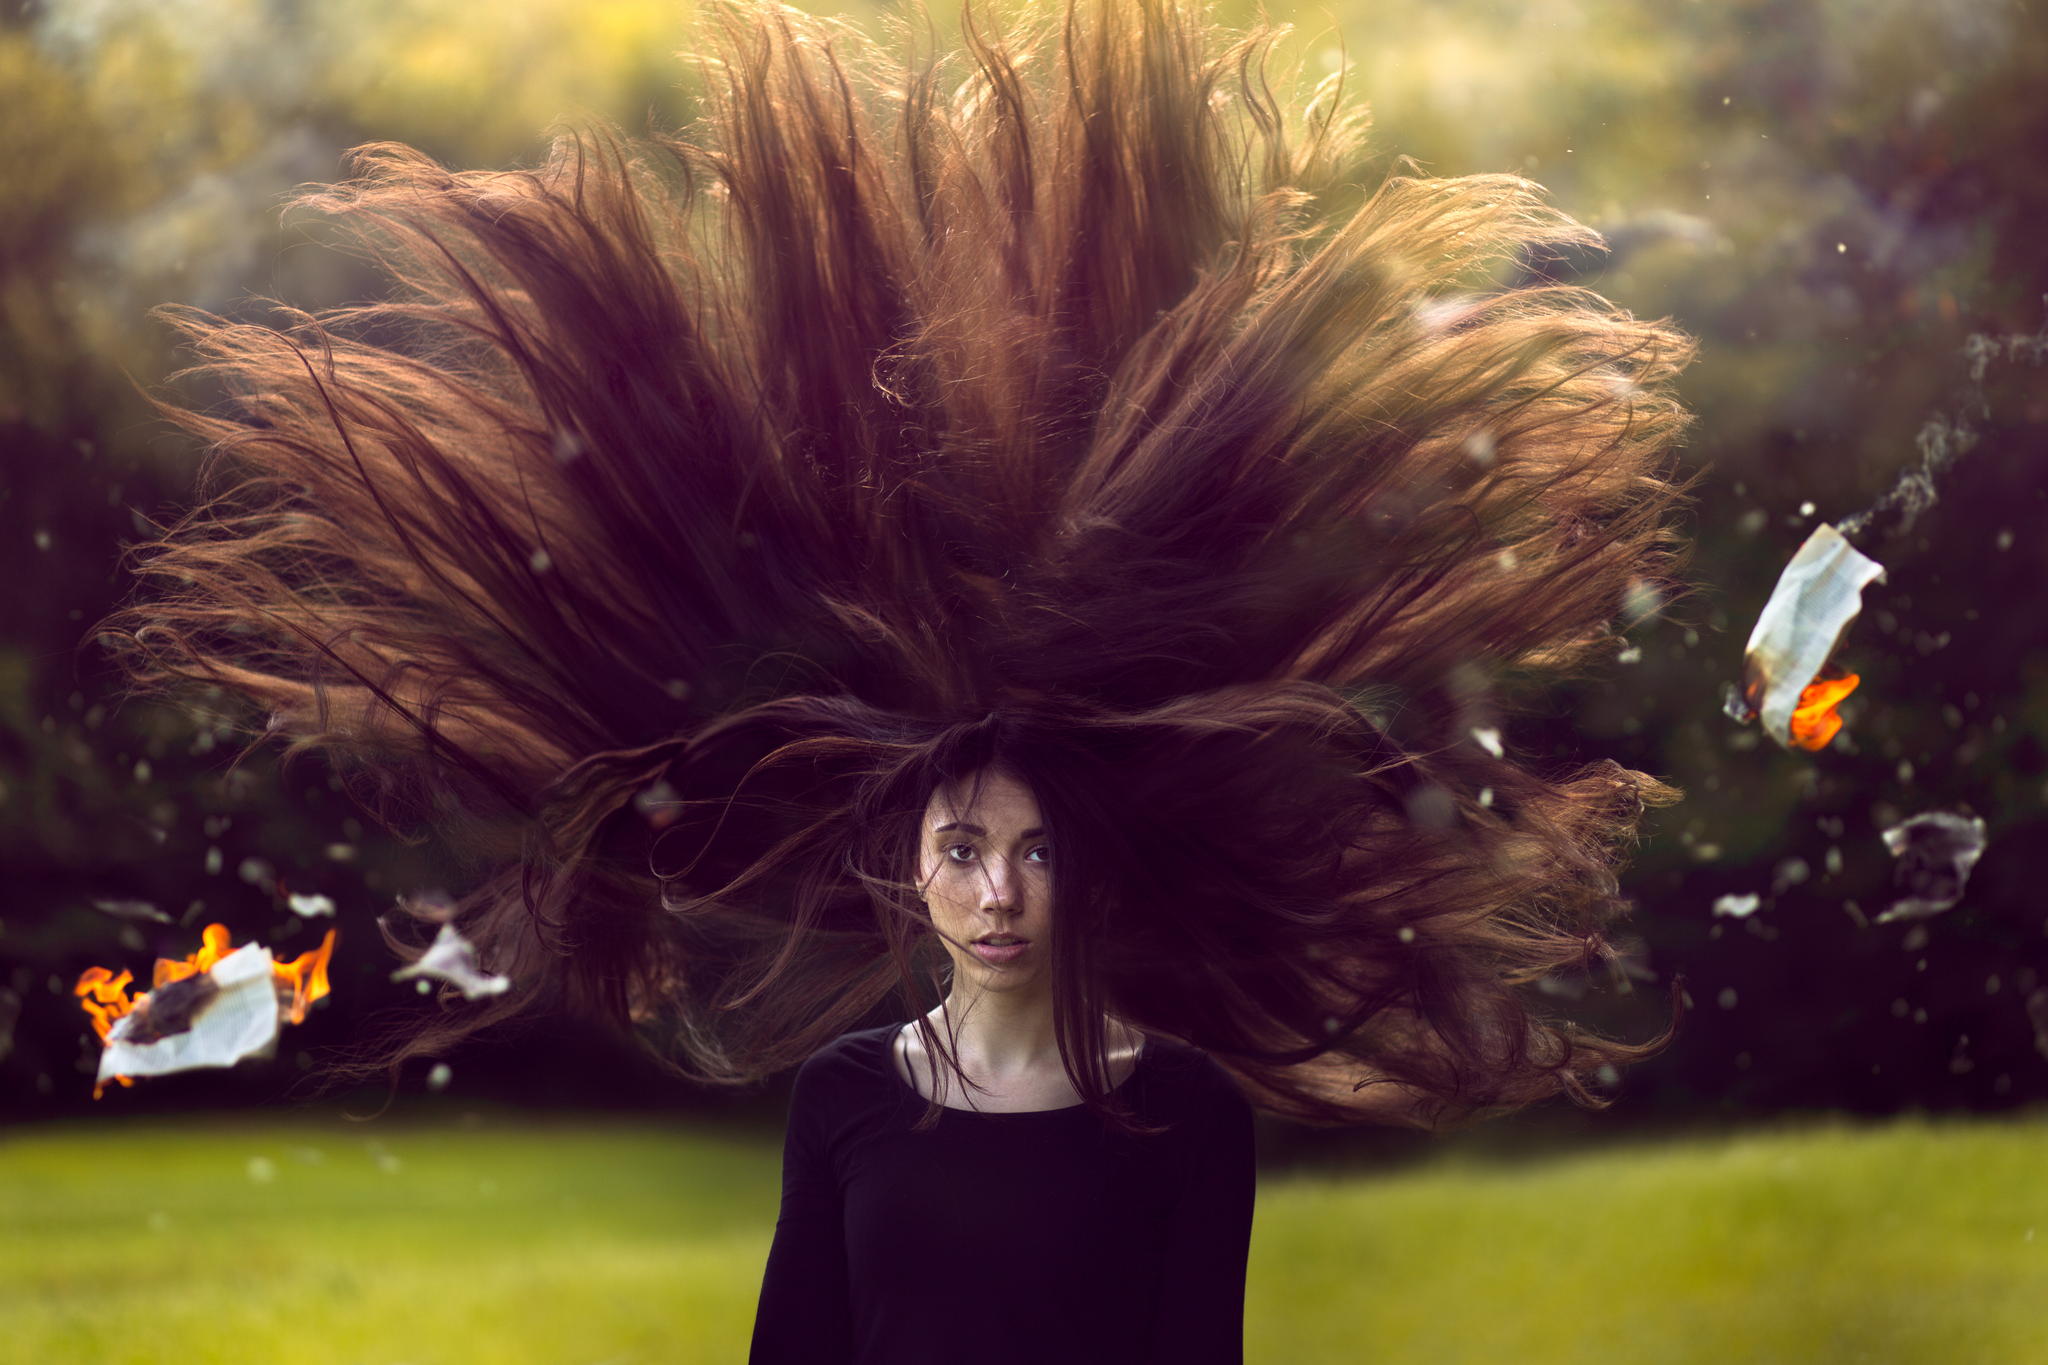 How To Create Big, Dramatic Hair In Photoshop - 500px